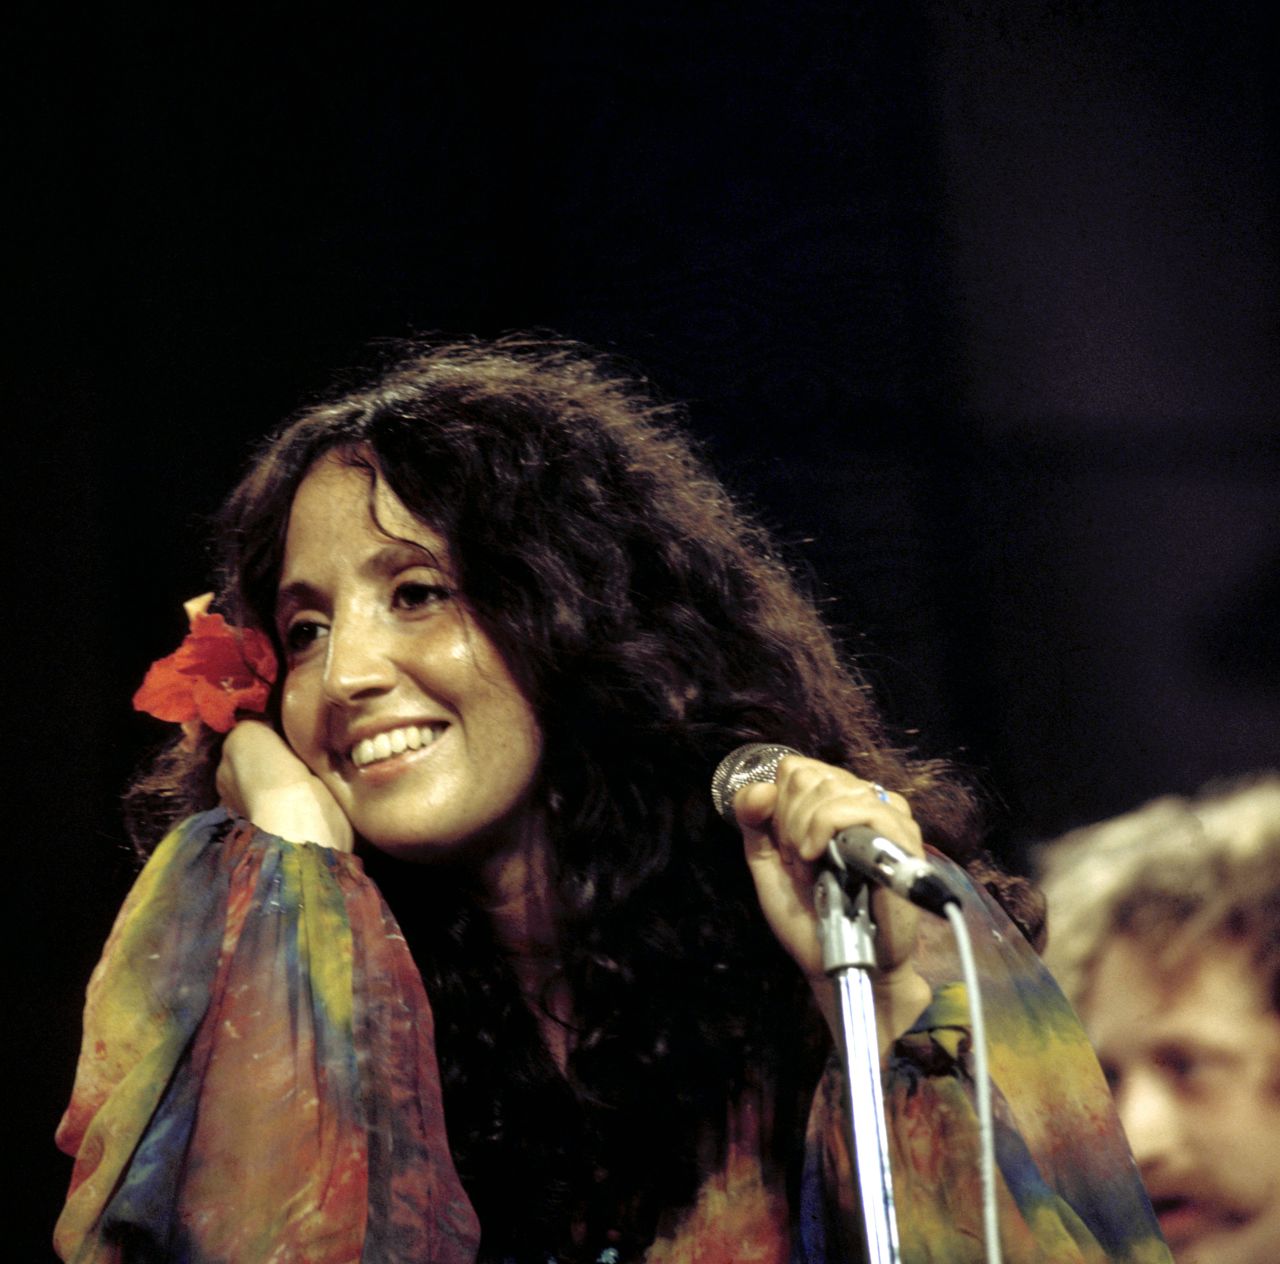 Maria Muldaur hit the Top 10 with <a href="http://www.youtube.com/watch?v=Yt2O4Y_sQ98&feature=kp" target="_blank" target="_blank">"Midnight at the Oasis,"</a> a romantic song that sent camels to bed and maintained that cactus "is our friend." 